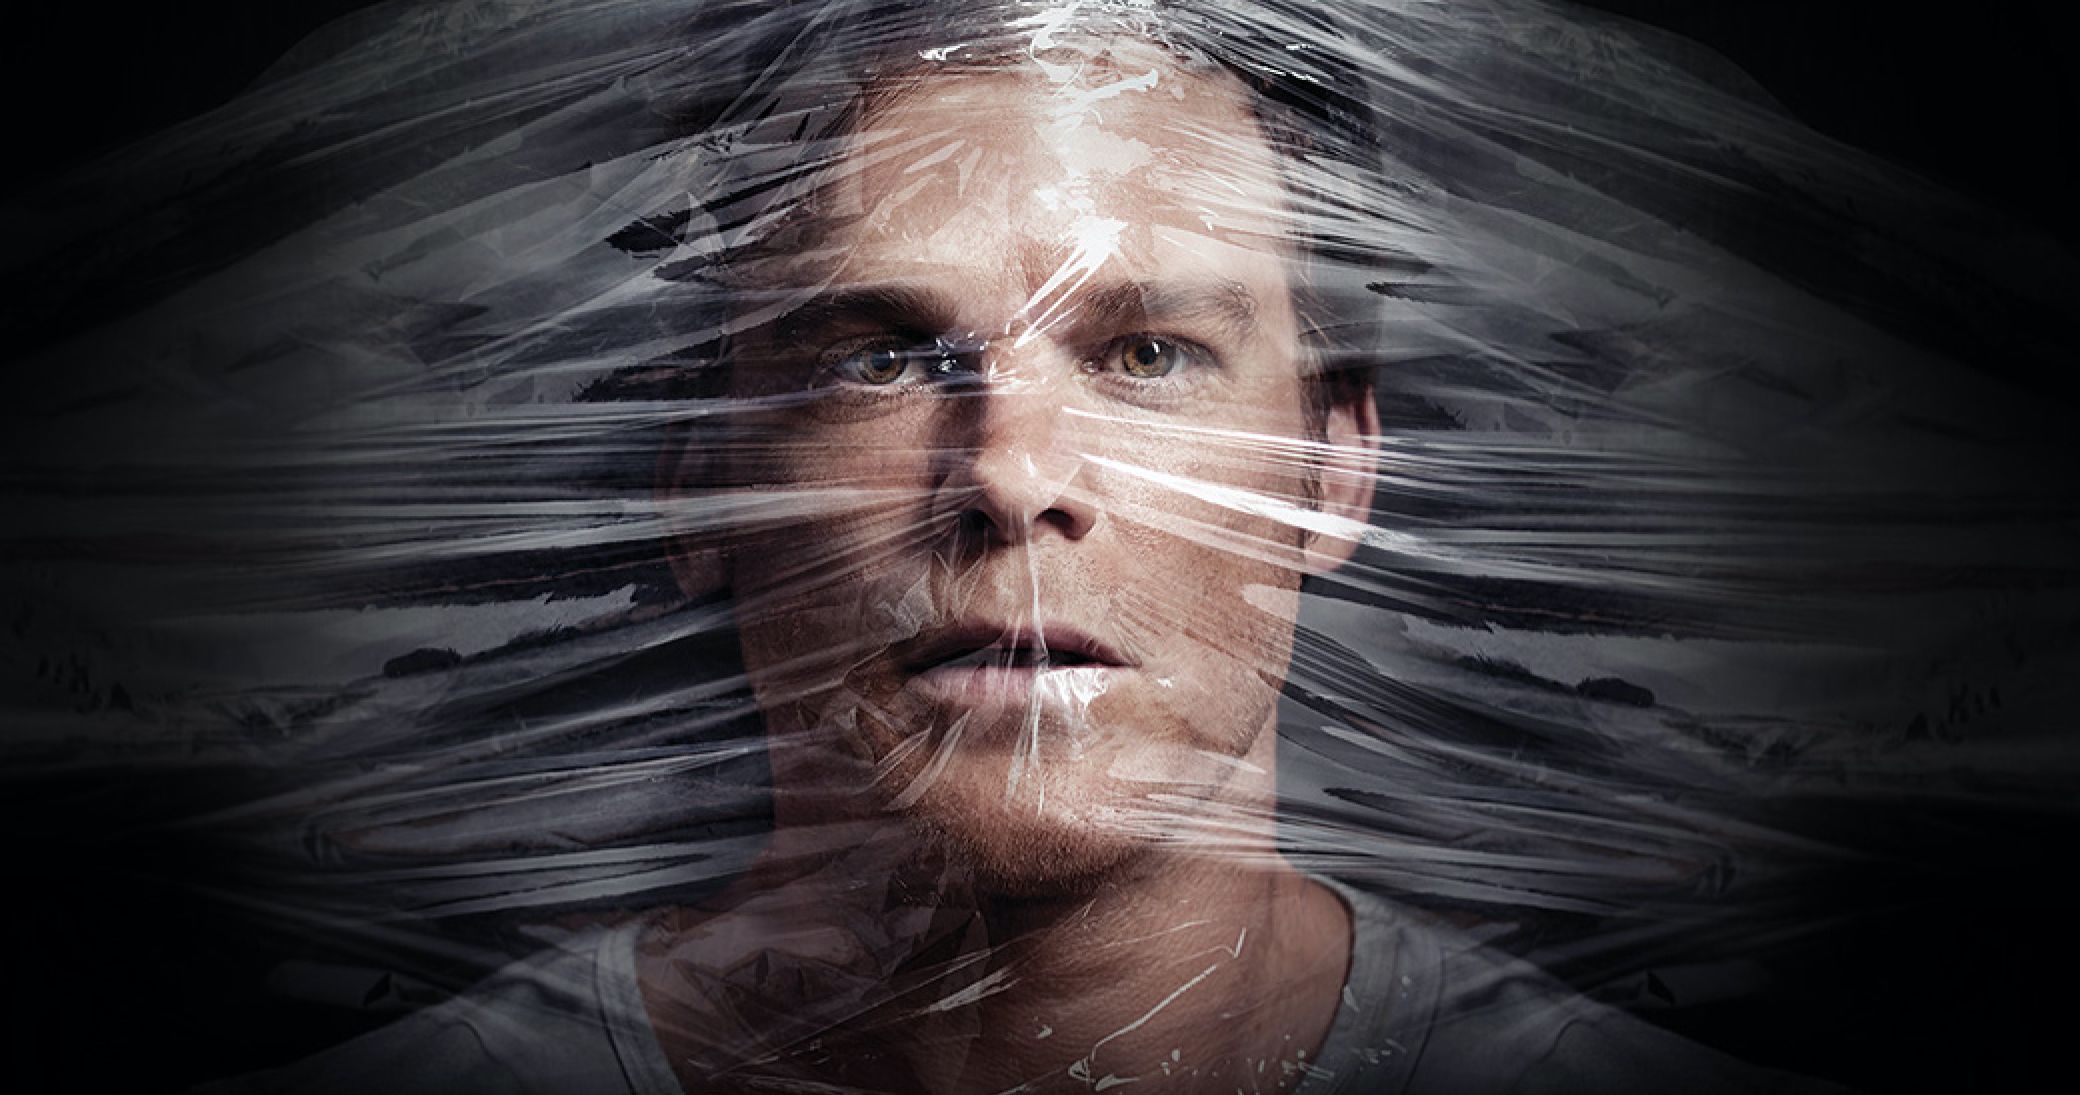 Why Now Is the Right Time to Resurrect Dexter According to Michael C. Hall